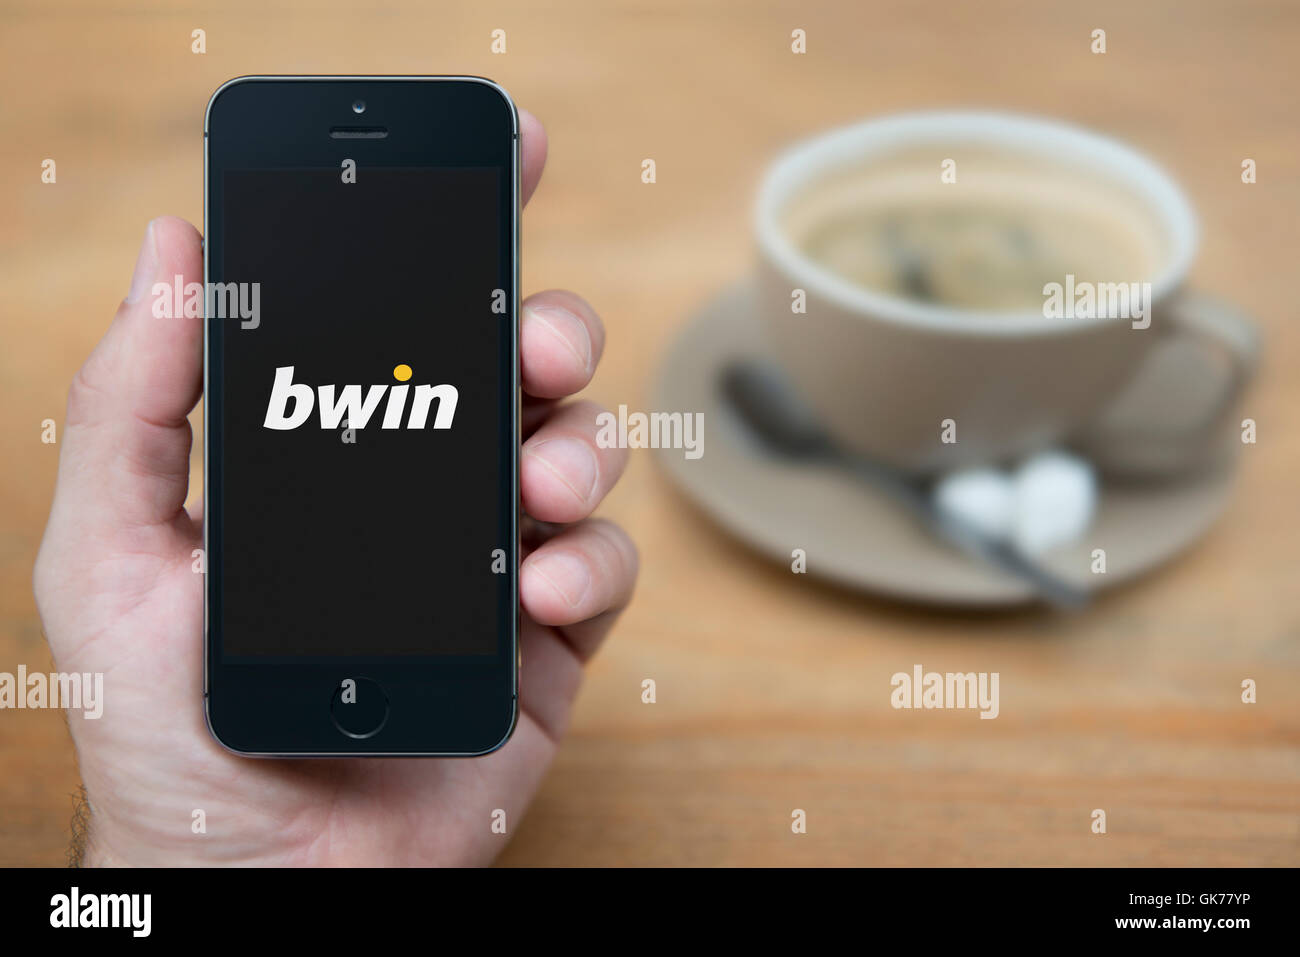 A man looks at his iPhone which displays the Bwin logo, while sat with a cup of coffee (Editorial use only). Stock Photo